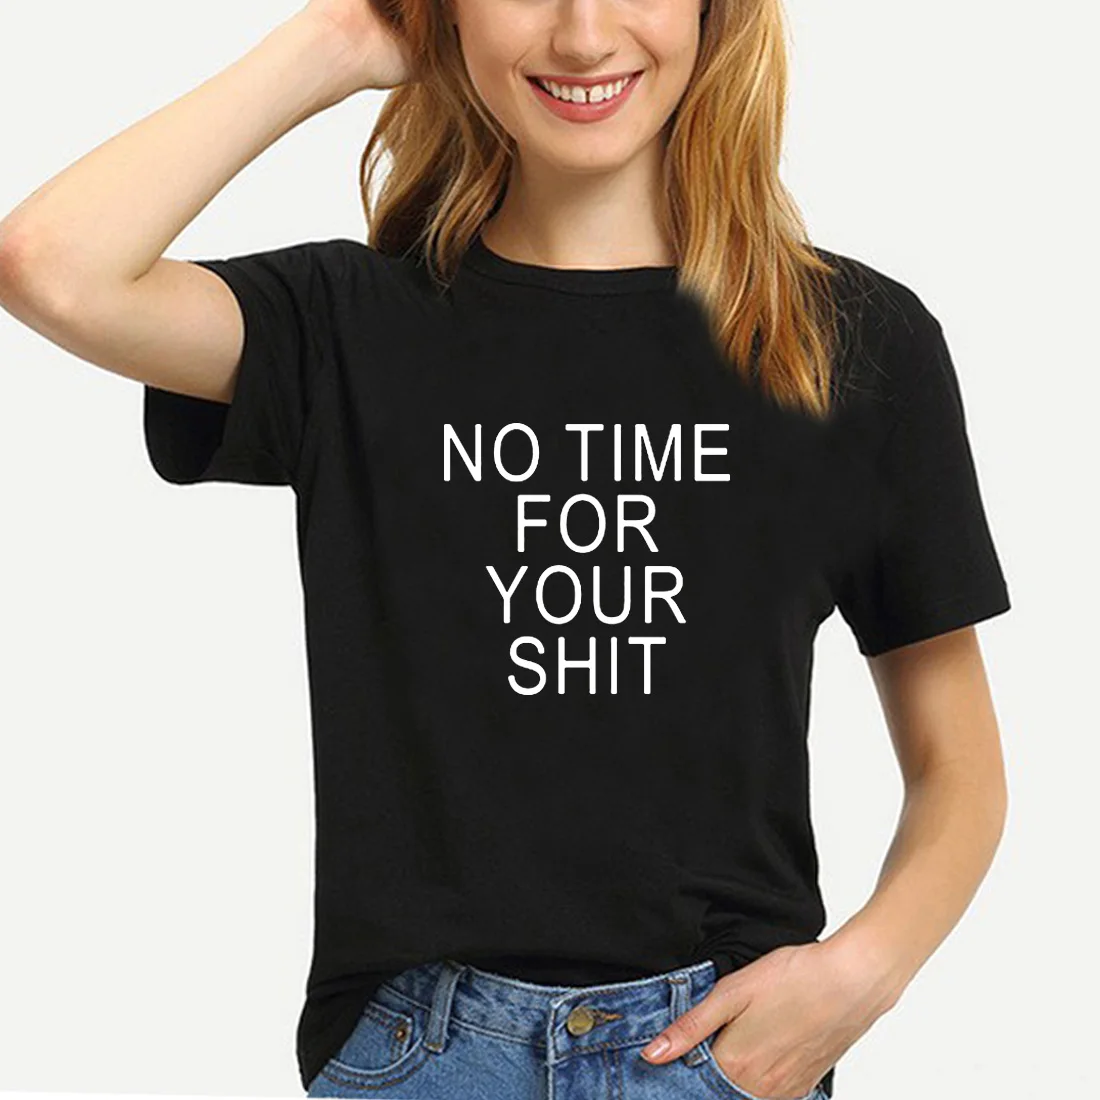 No Time for Your Shirt Funny T Women Top Letter Printed Short Sleeve O-neck Tee Femme Black White Ladies Tops | Женская одежда